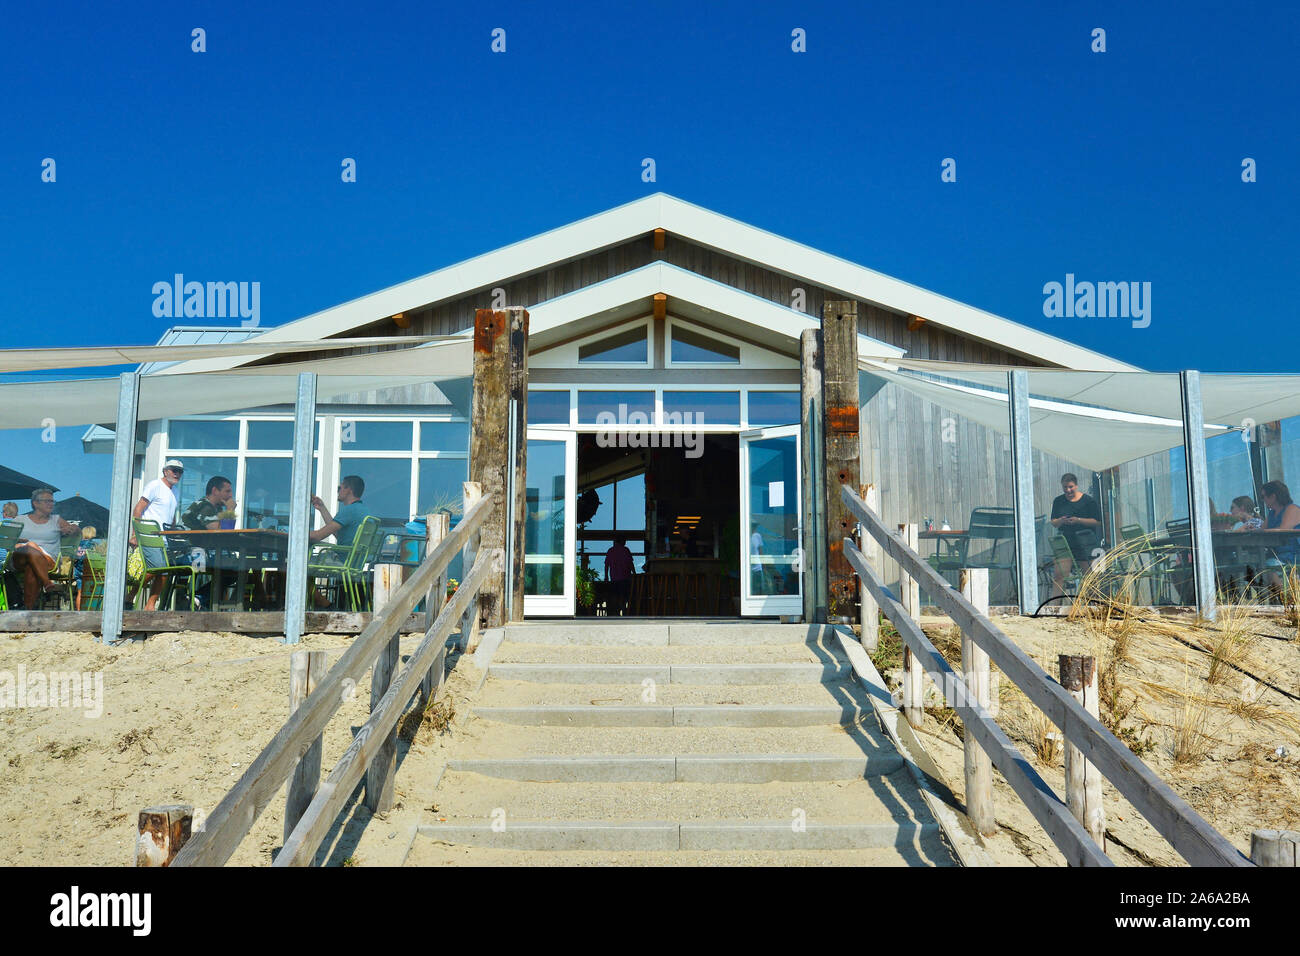 Texel, Netherlands - August 2019: Entrance with stairs to beach pavilion restaurant 'Paal 9' on a sunny day on island Texel Stock Photo